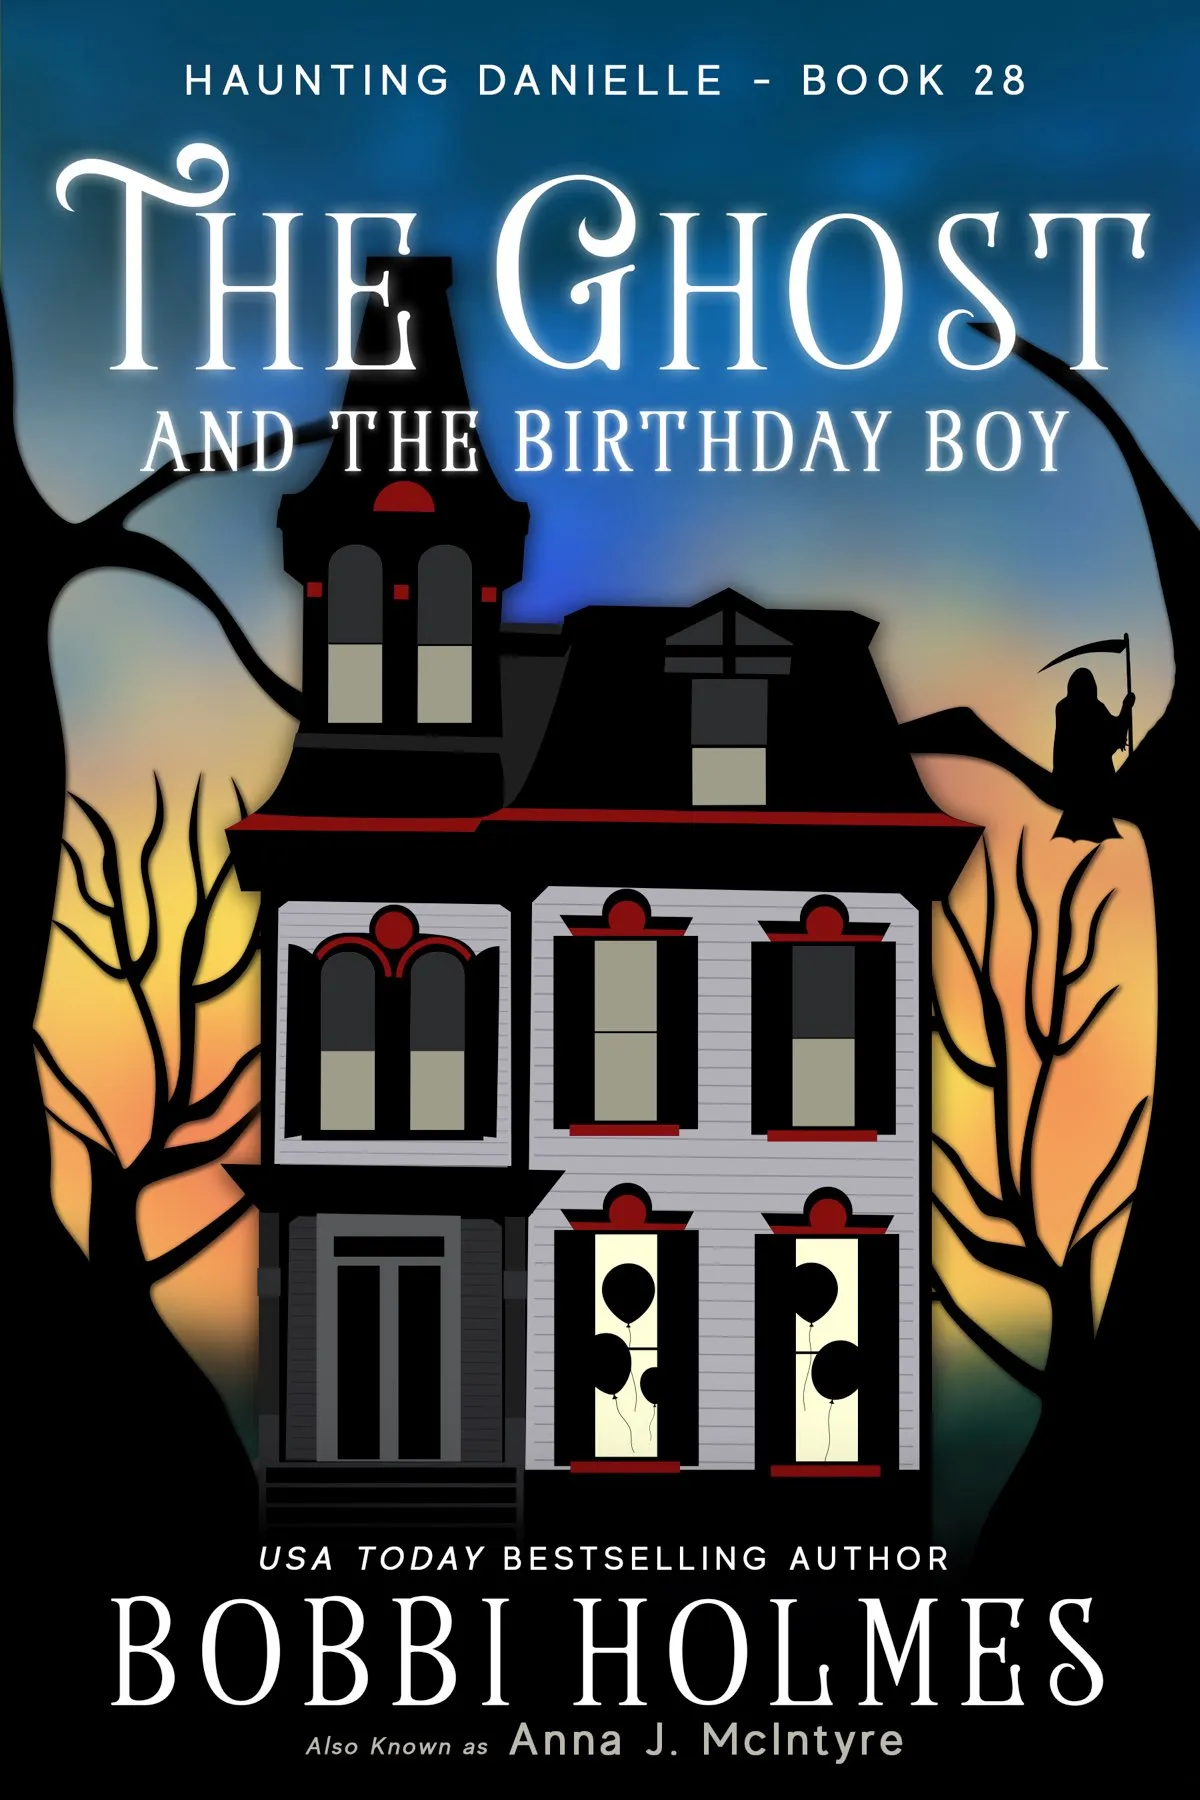 The Ghost and the Birthday Boy (Haunting Danielle #28)